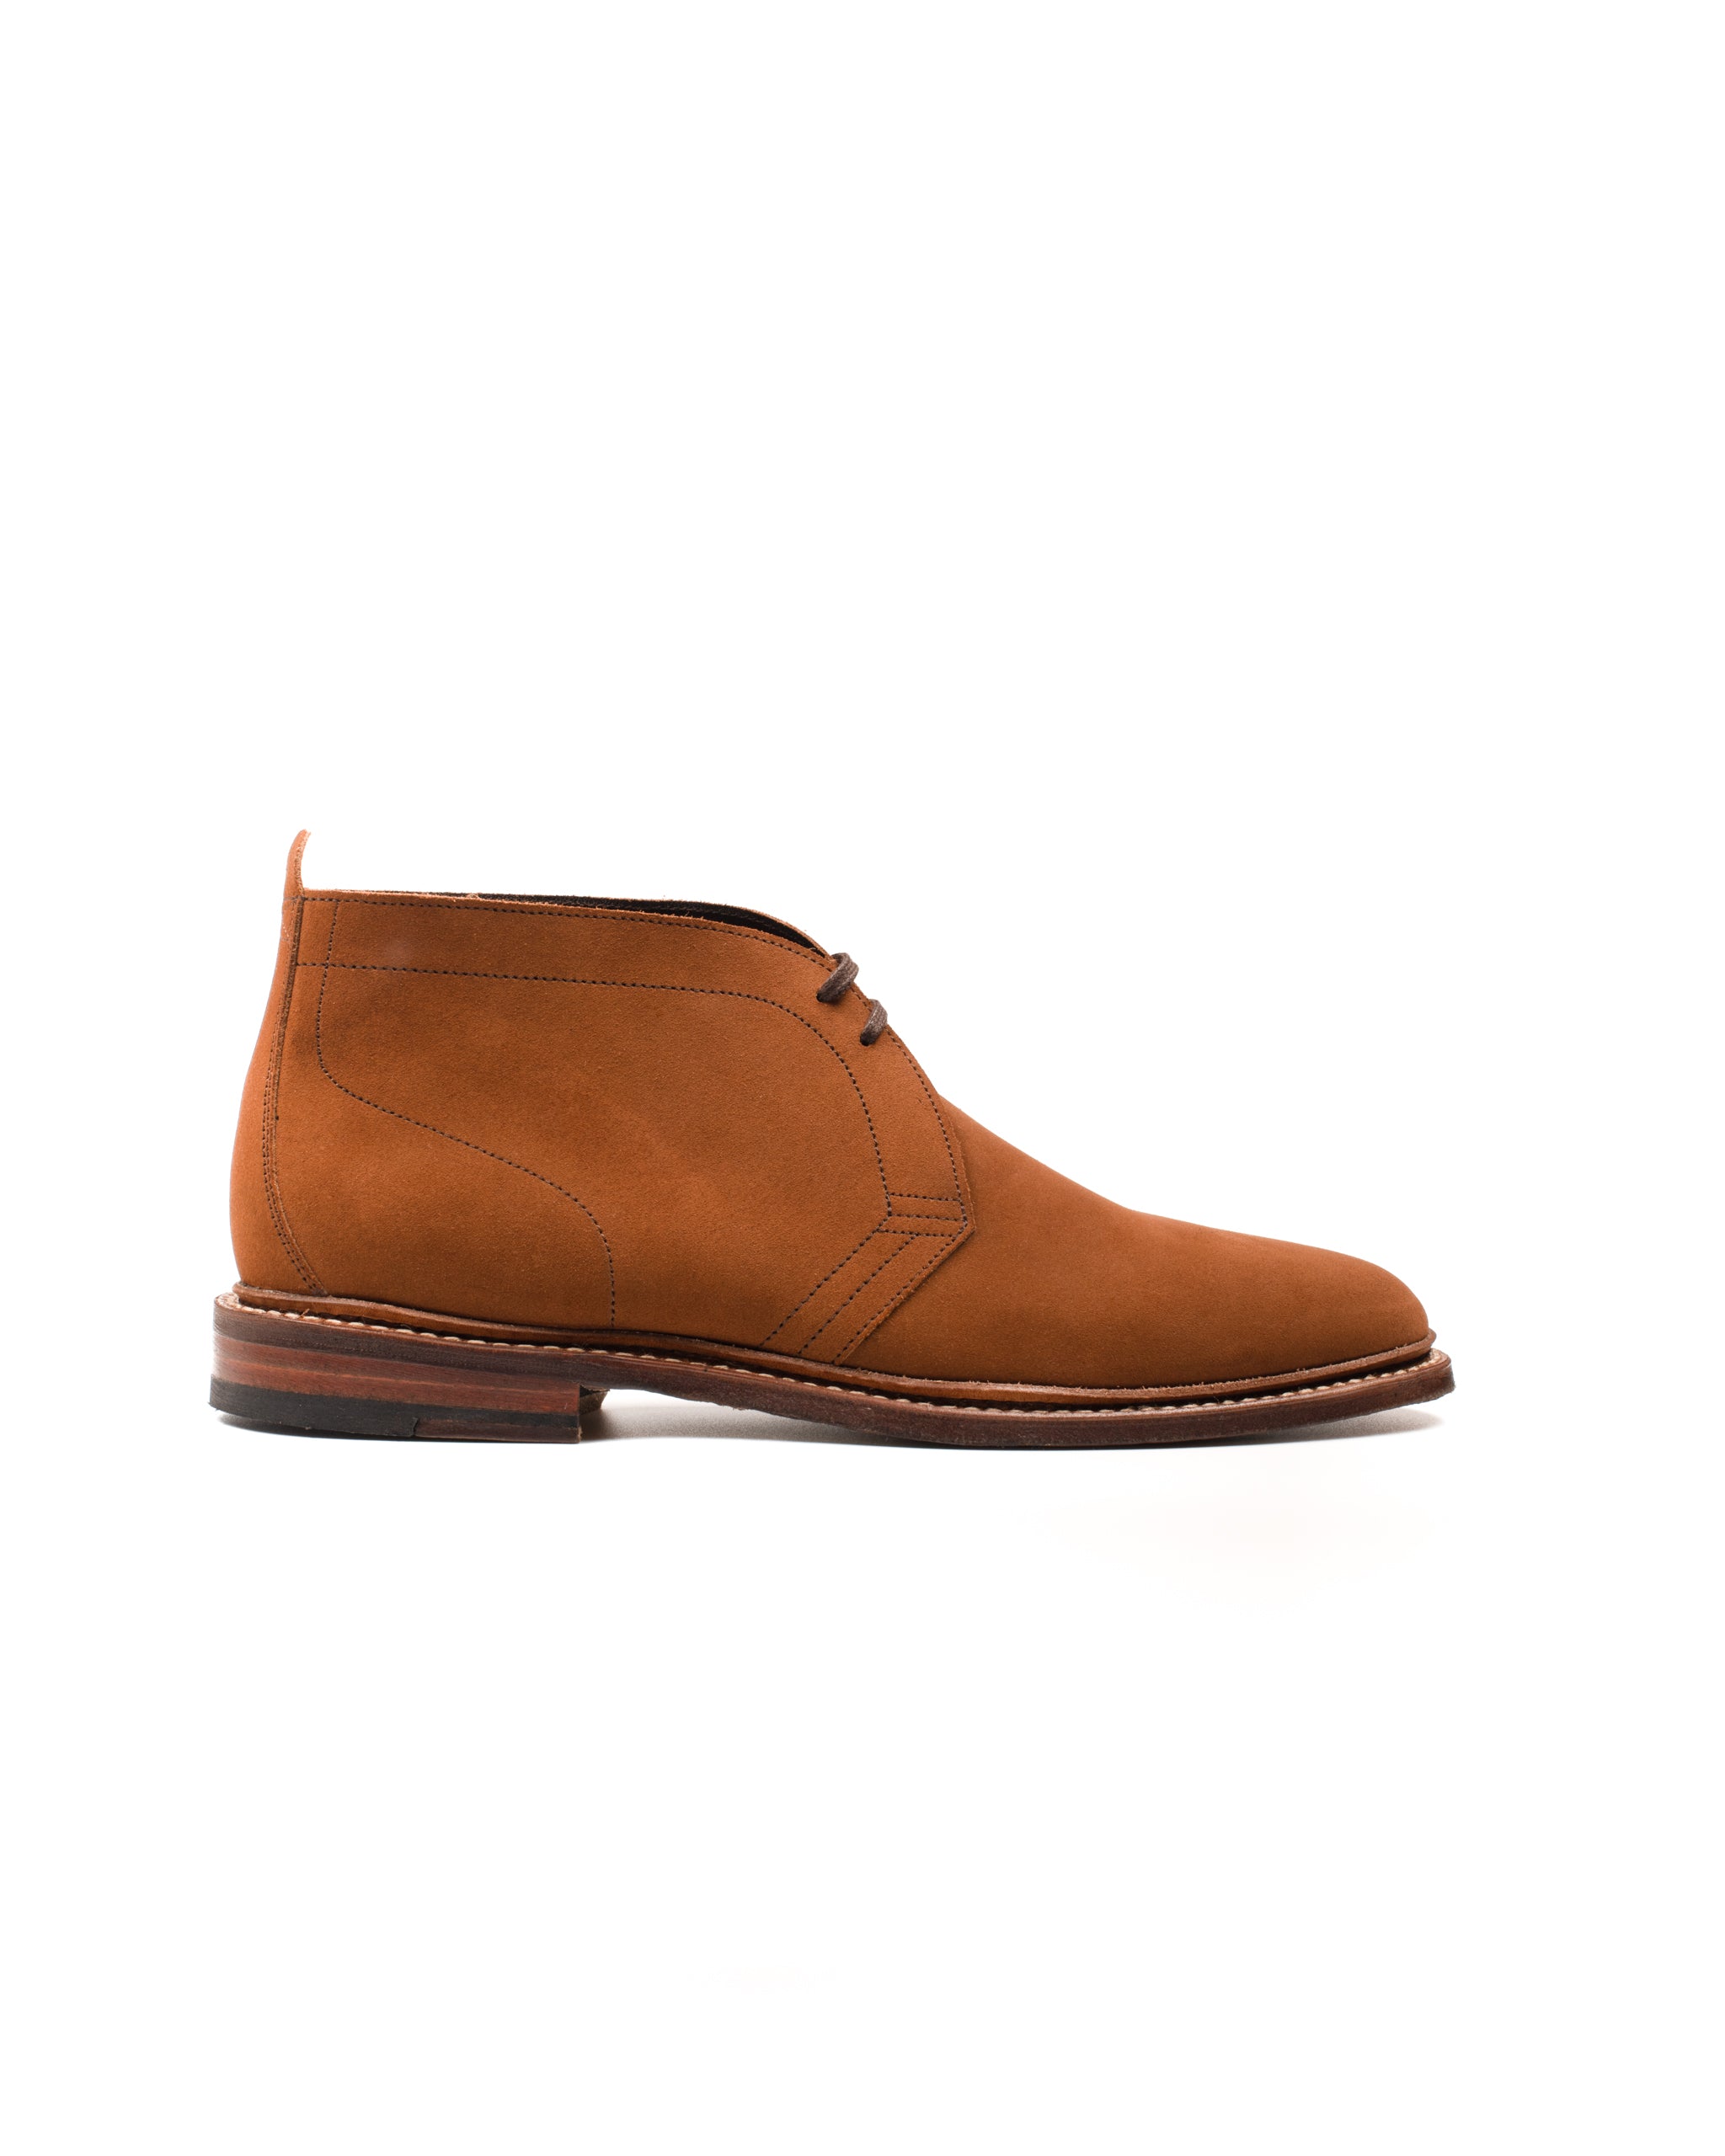 Chukka Boot // Unlined // English Suede // Snuff // Rendenbach Ledersohle